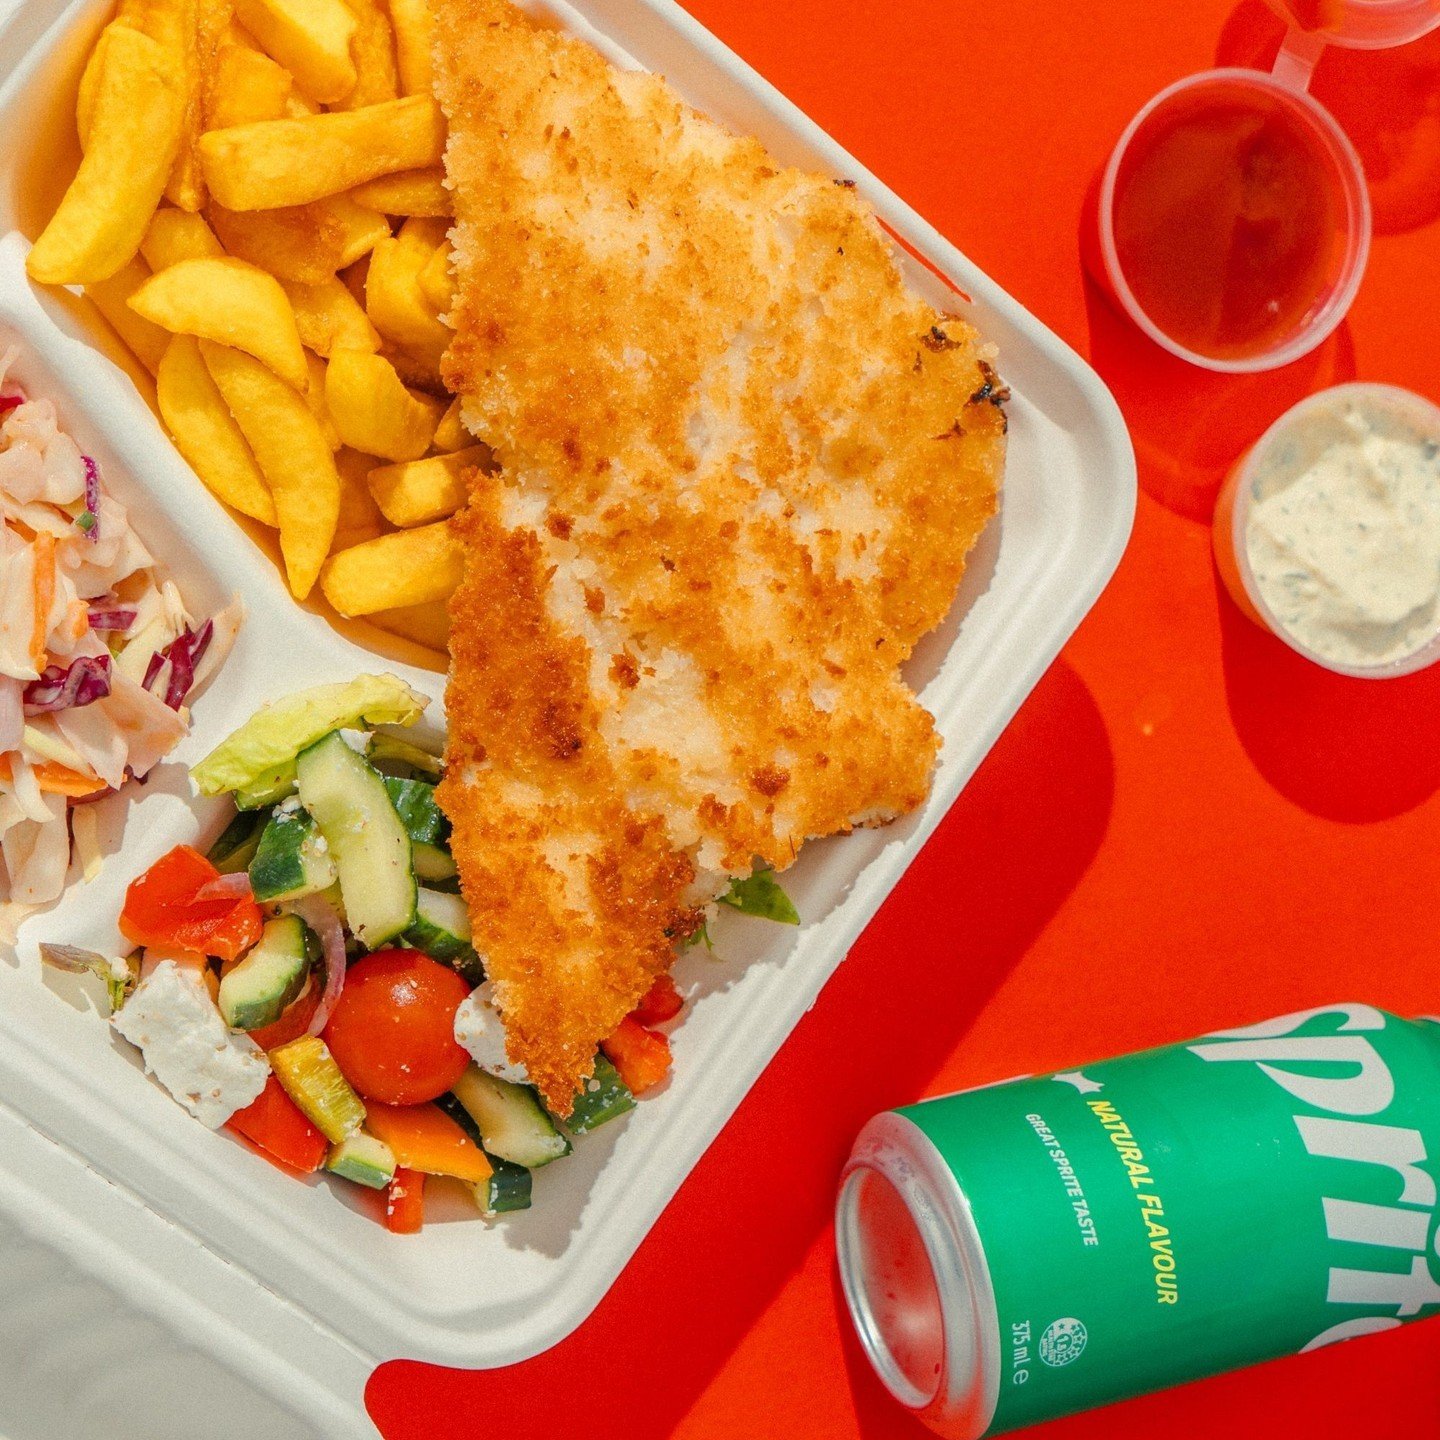 Our fish pack is packed with, salad, chips and golden crispy-fried fish. Add sauce and a drink (of course) and then your weekend is complete. The best looking fish and chips in town.⁠
⁠
Shark Tank Seafood⁠
Open 11am - 9pm